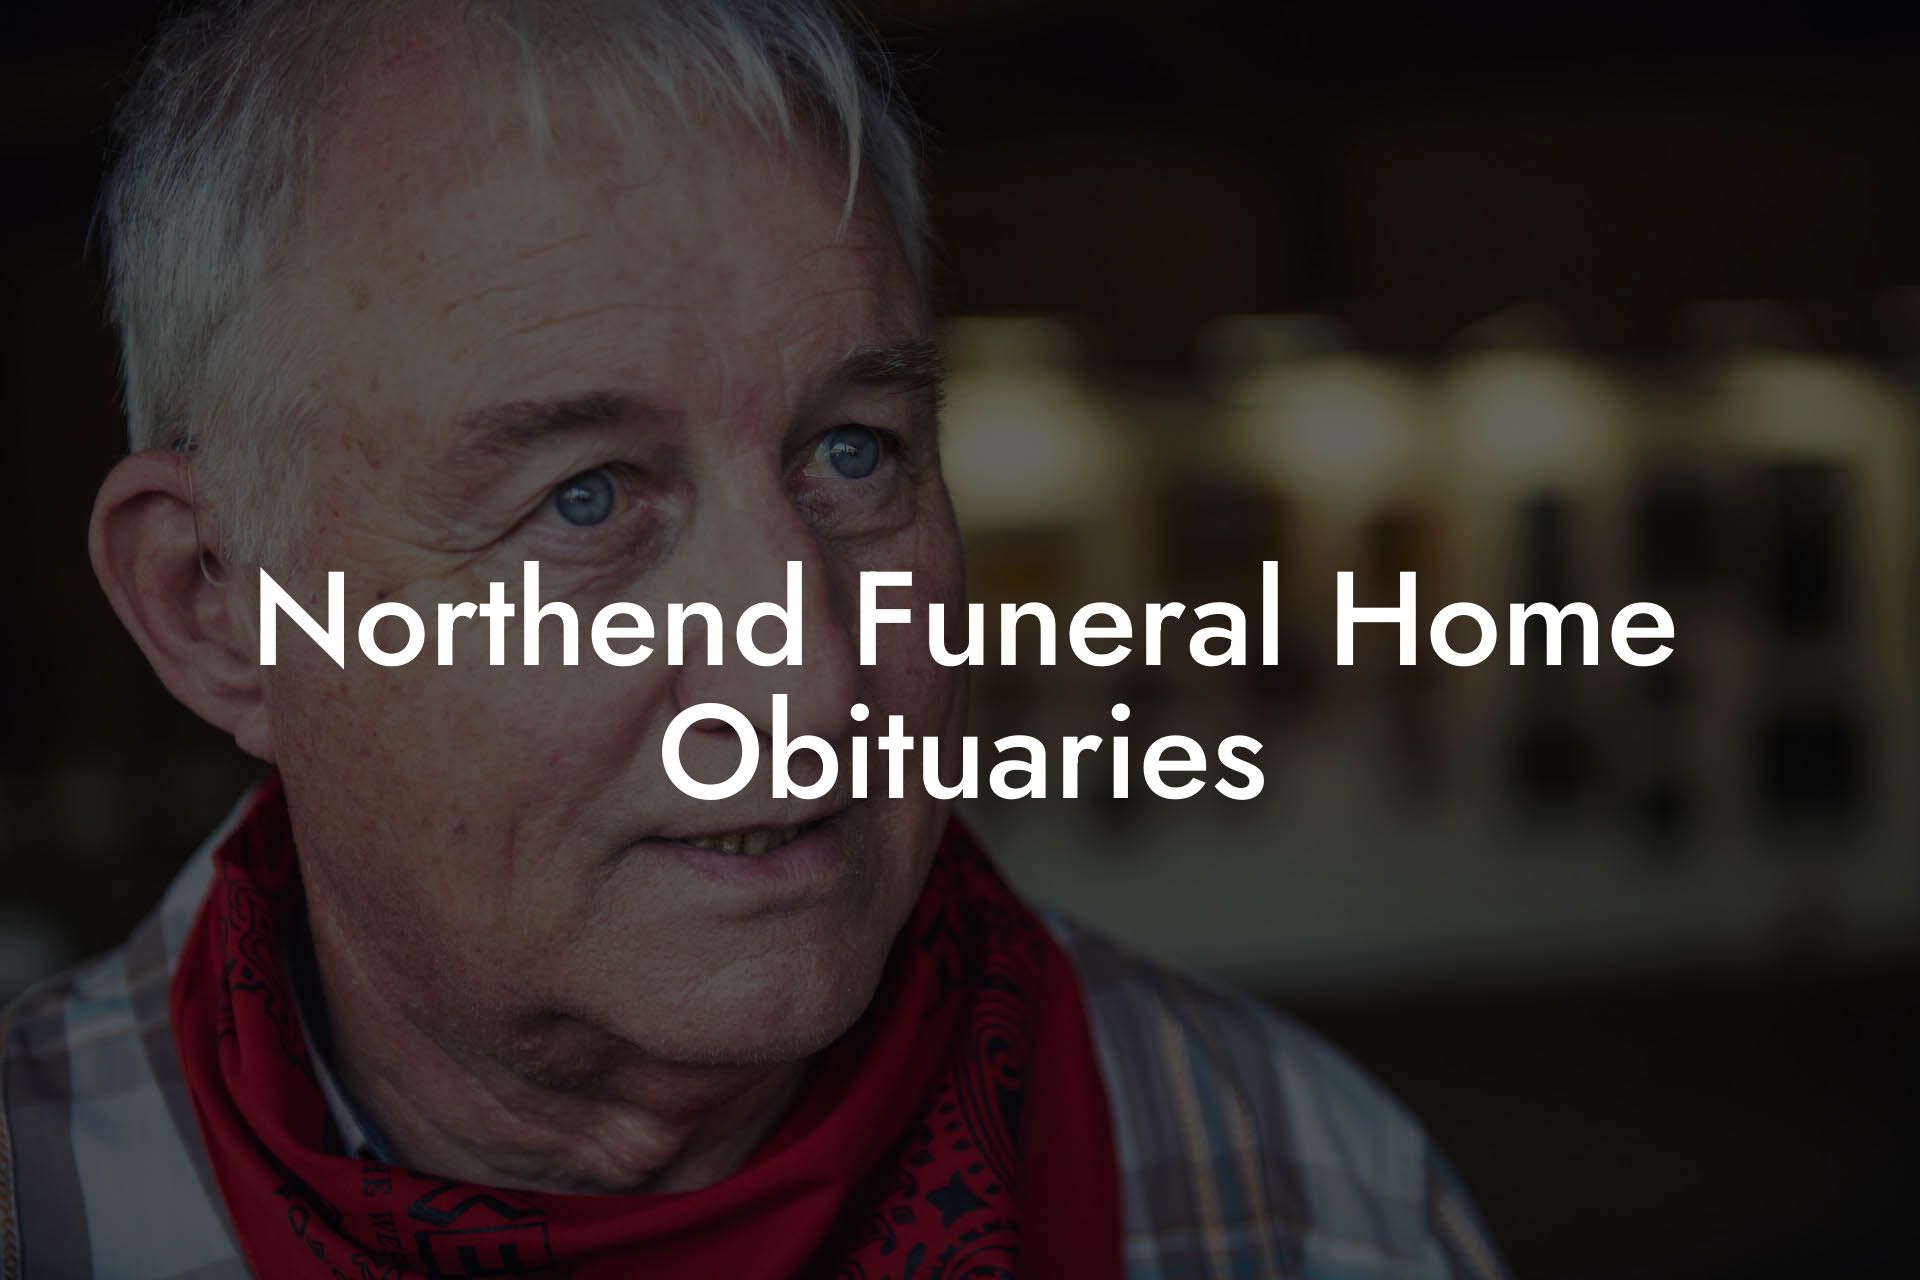 Northend Funeral Home Obituaries